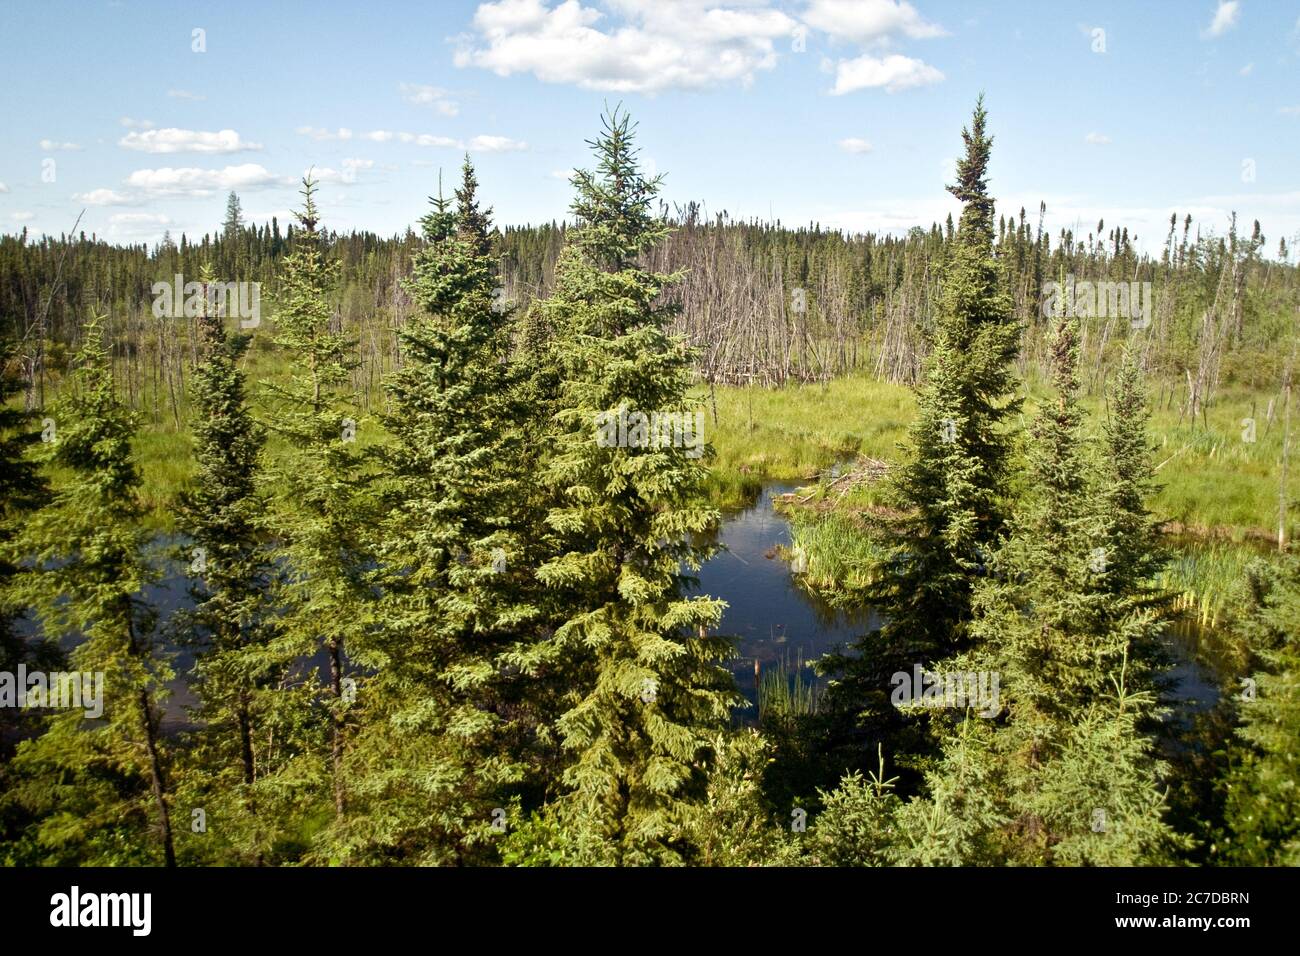 Wetlands, bog and coniferous forest in the remote boreal forest wilderness near The Pas, northern Manitoba, Canada. Stock Photo